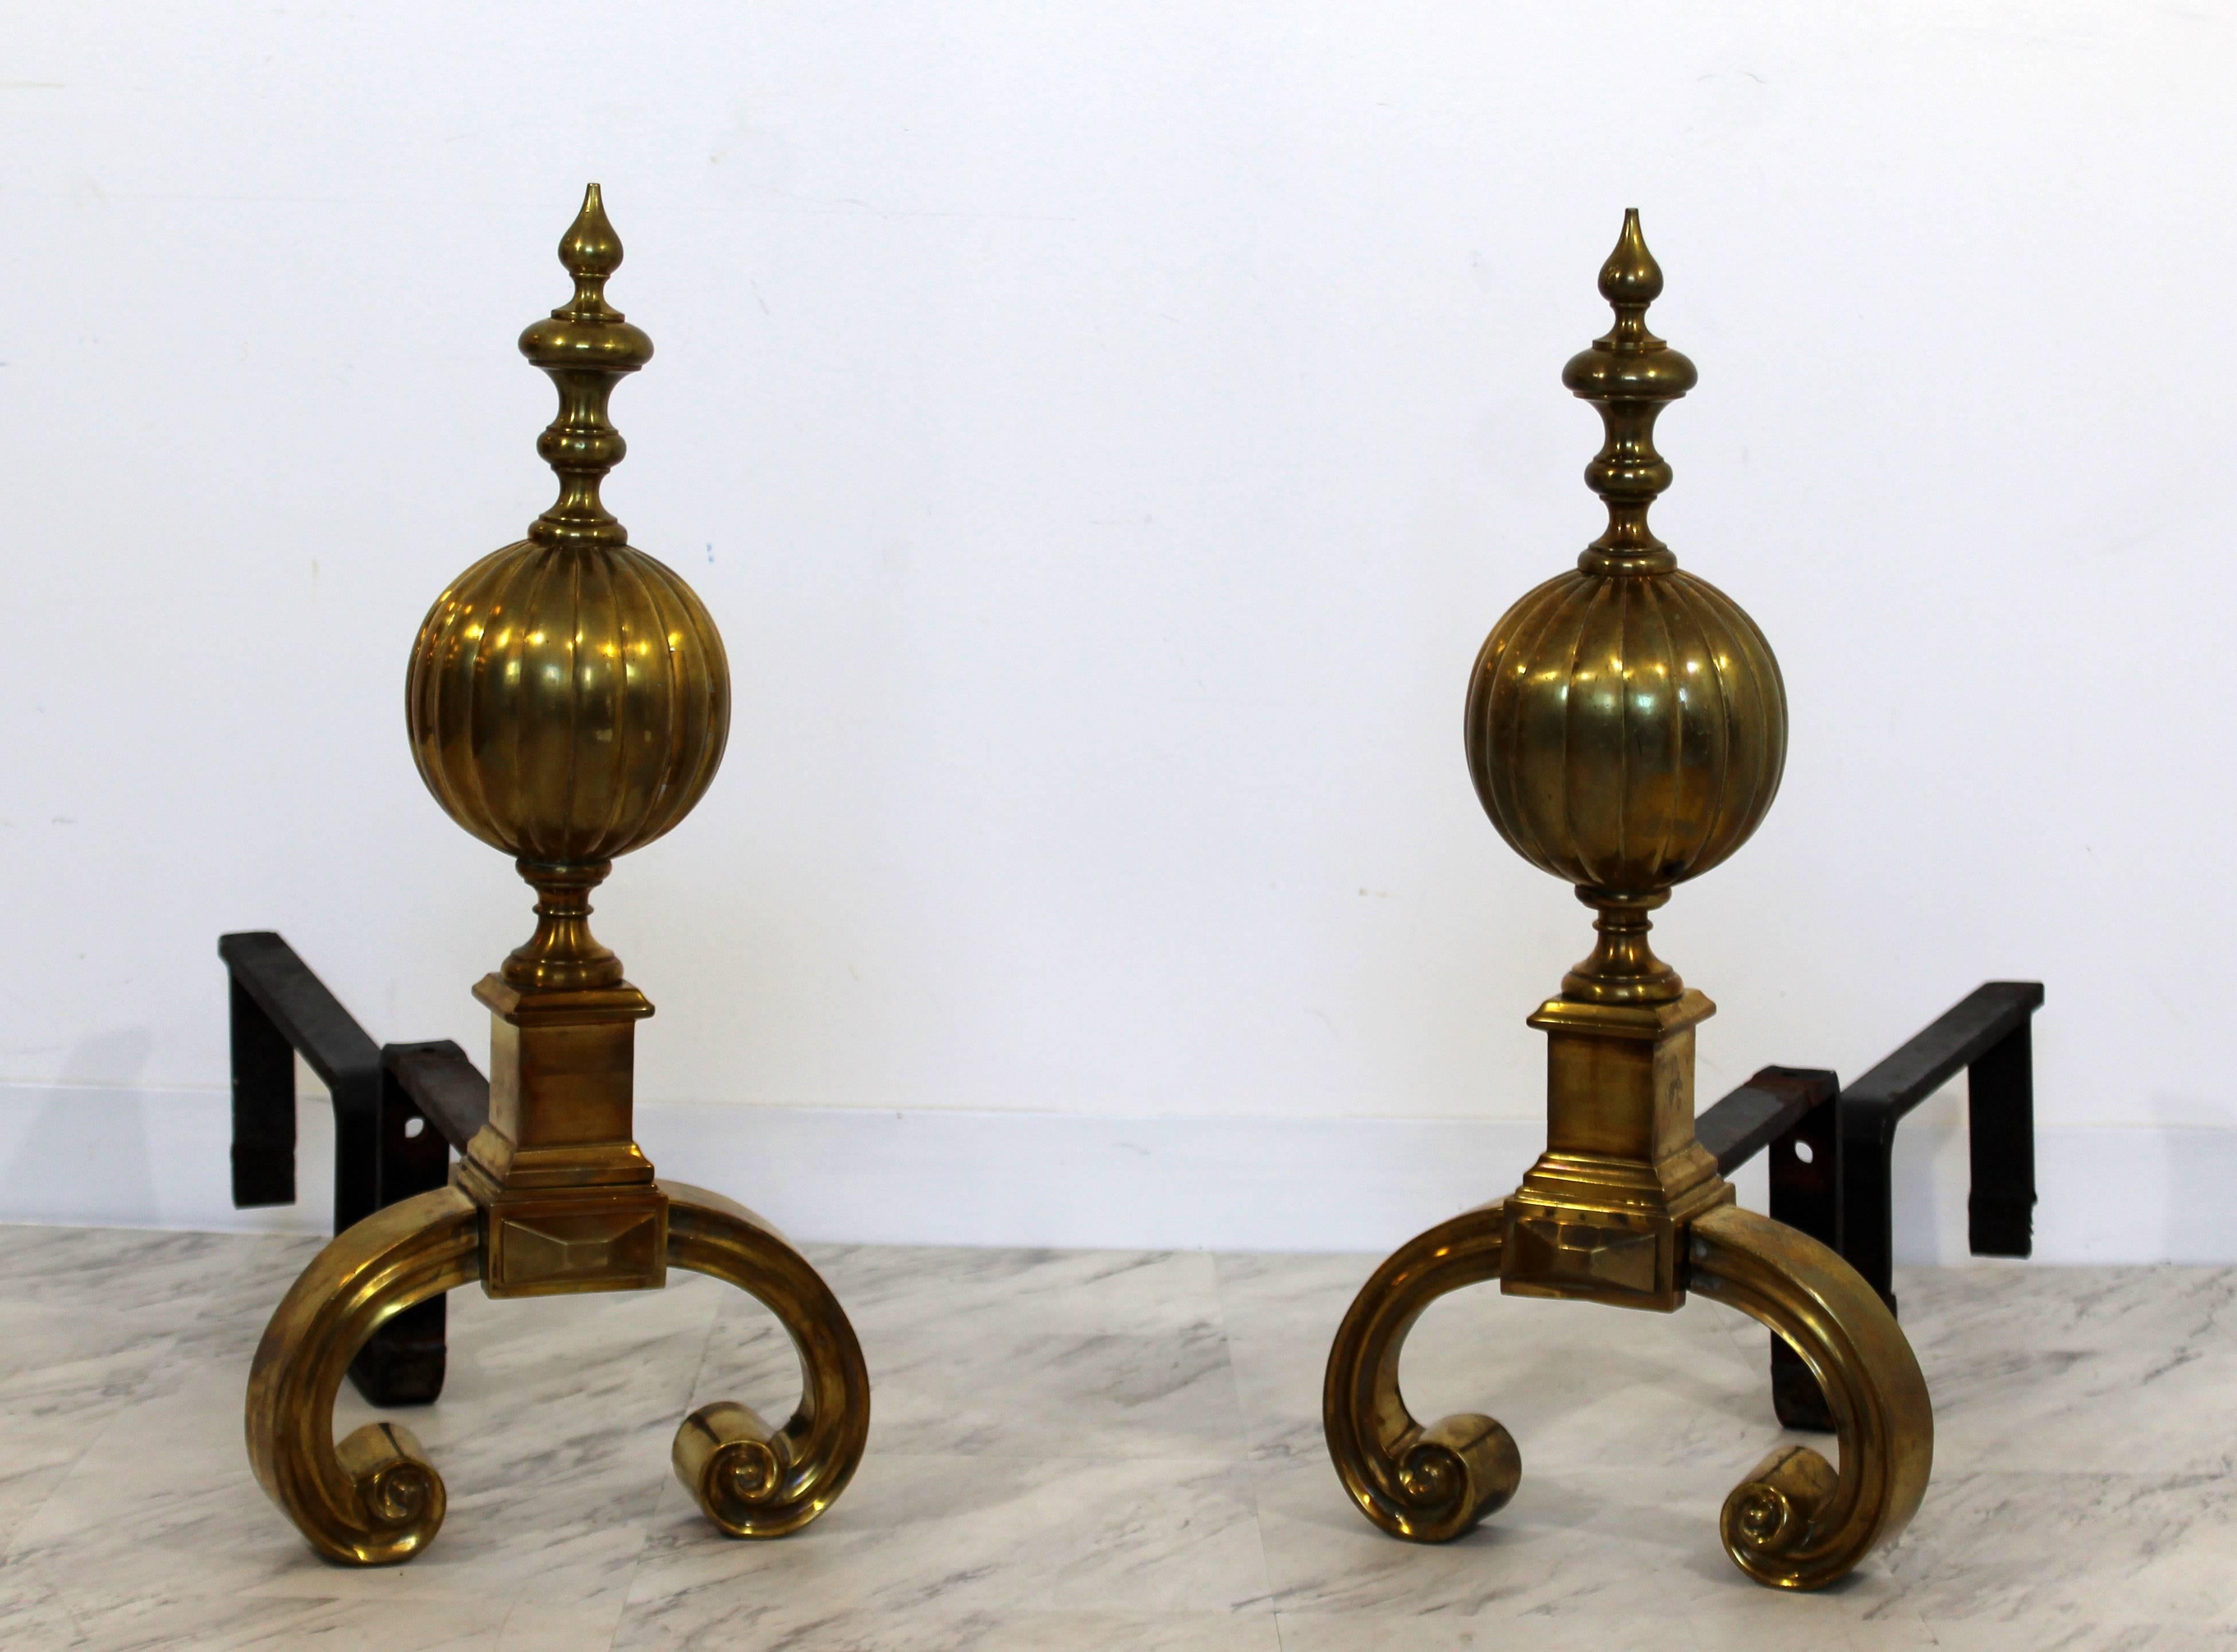 American Art Deco Pair of Solid Brass and Iron Metal Andirons Decorative Fireplace Tools